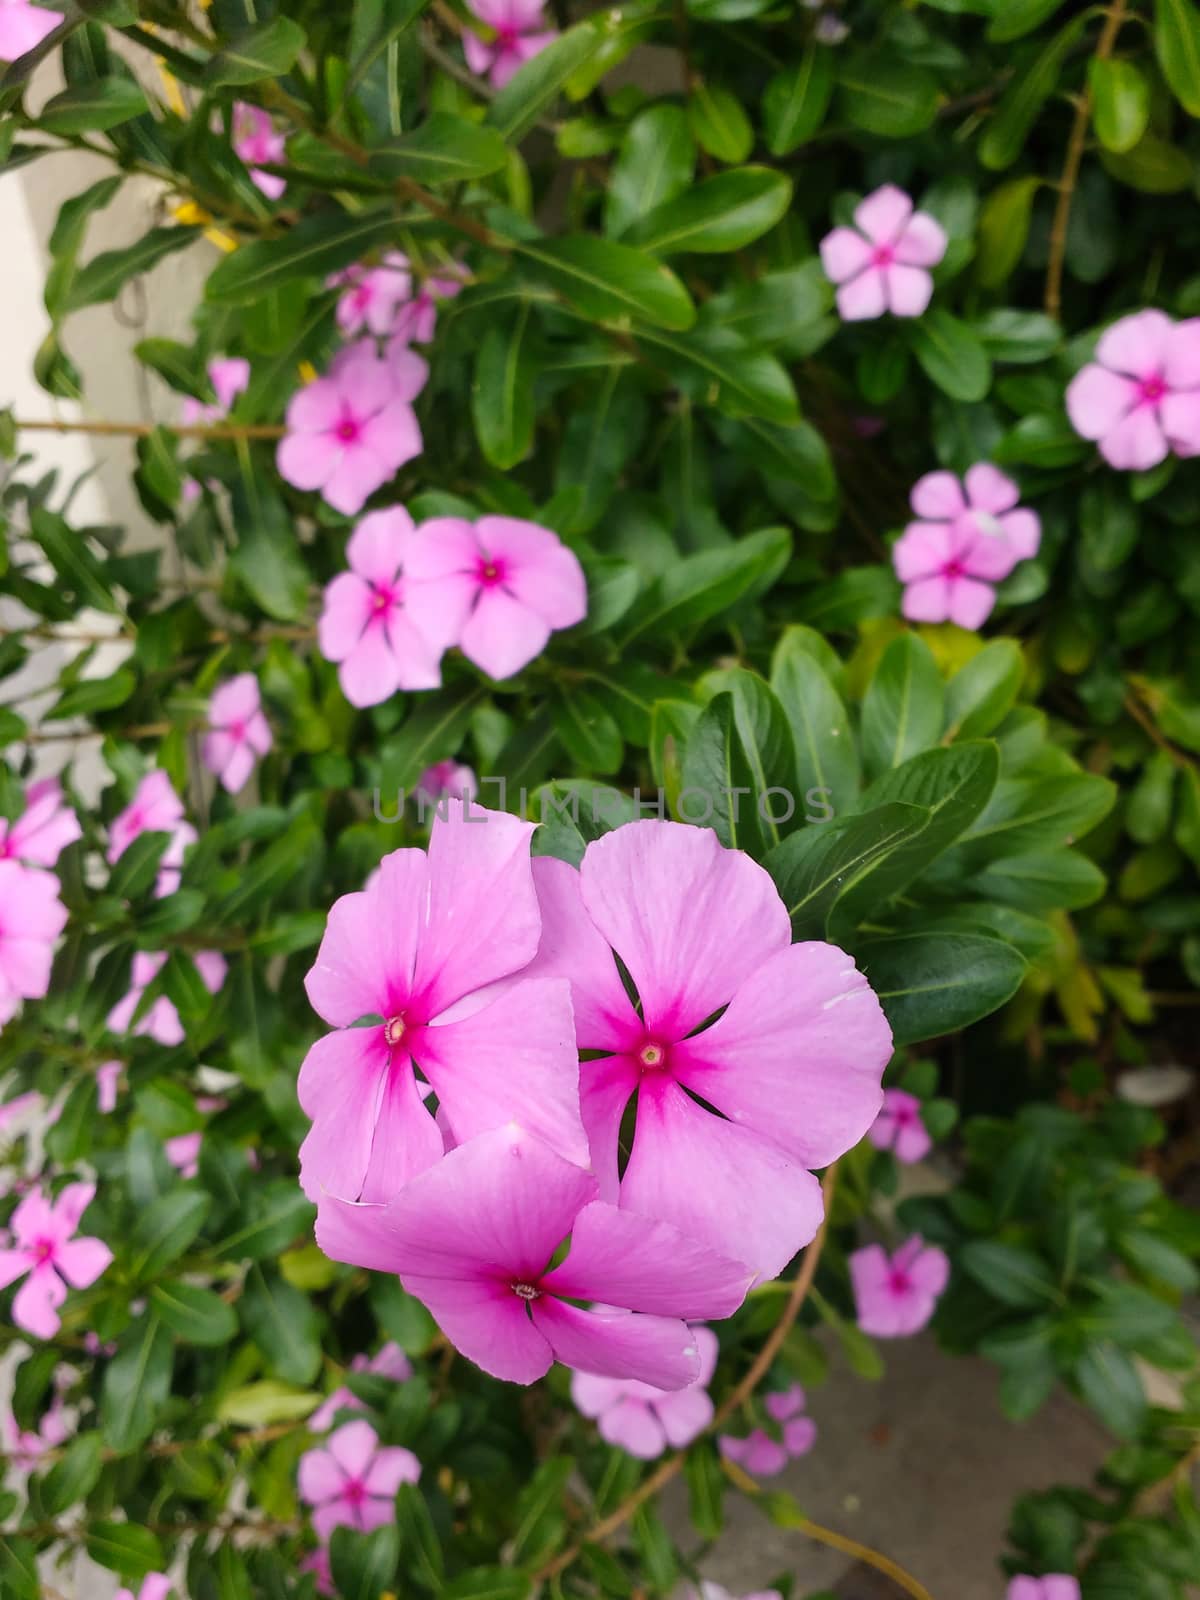 Catharanthus roseus, delicate pink flowers of shameless mary. by silviopl